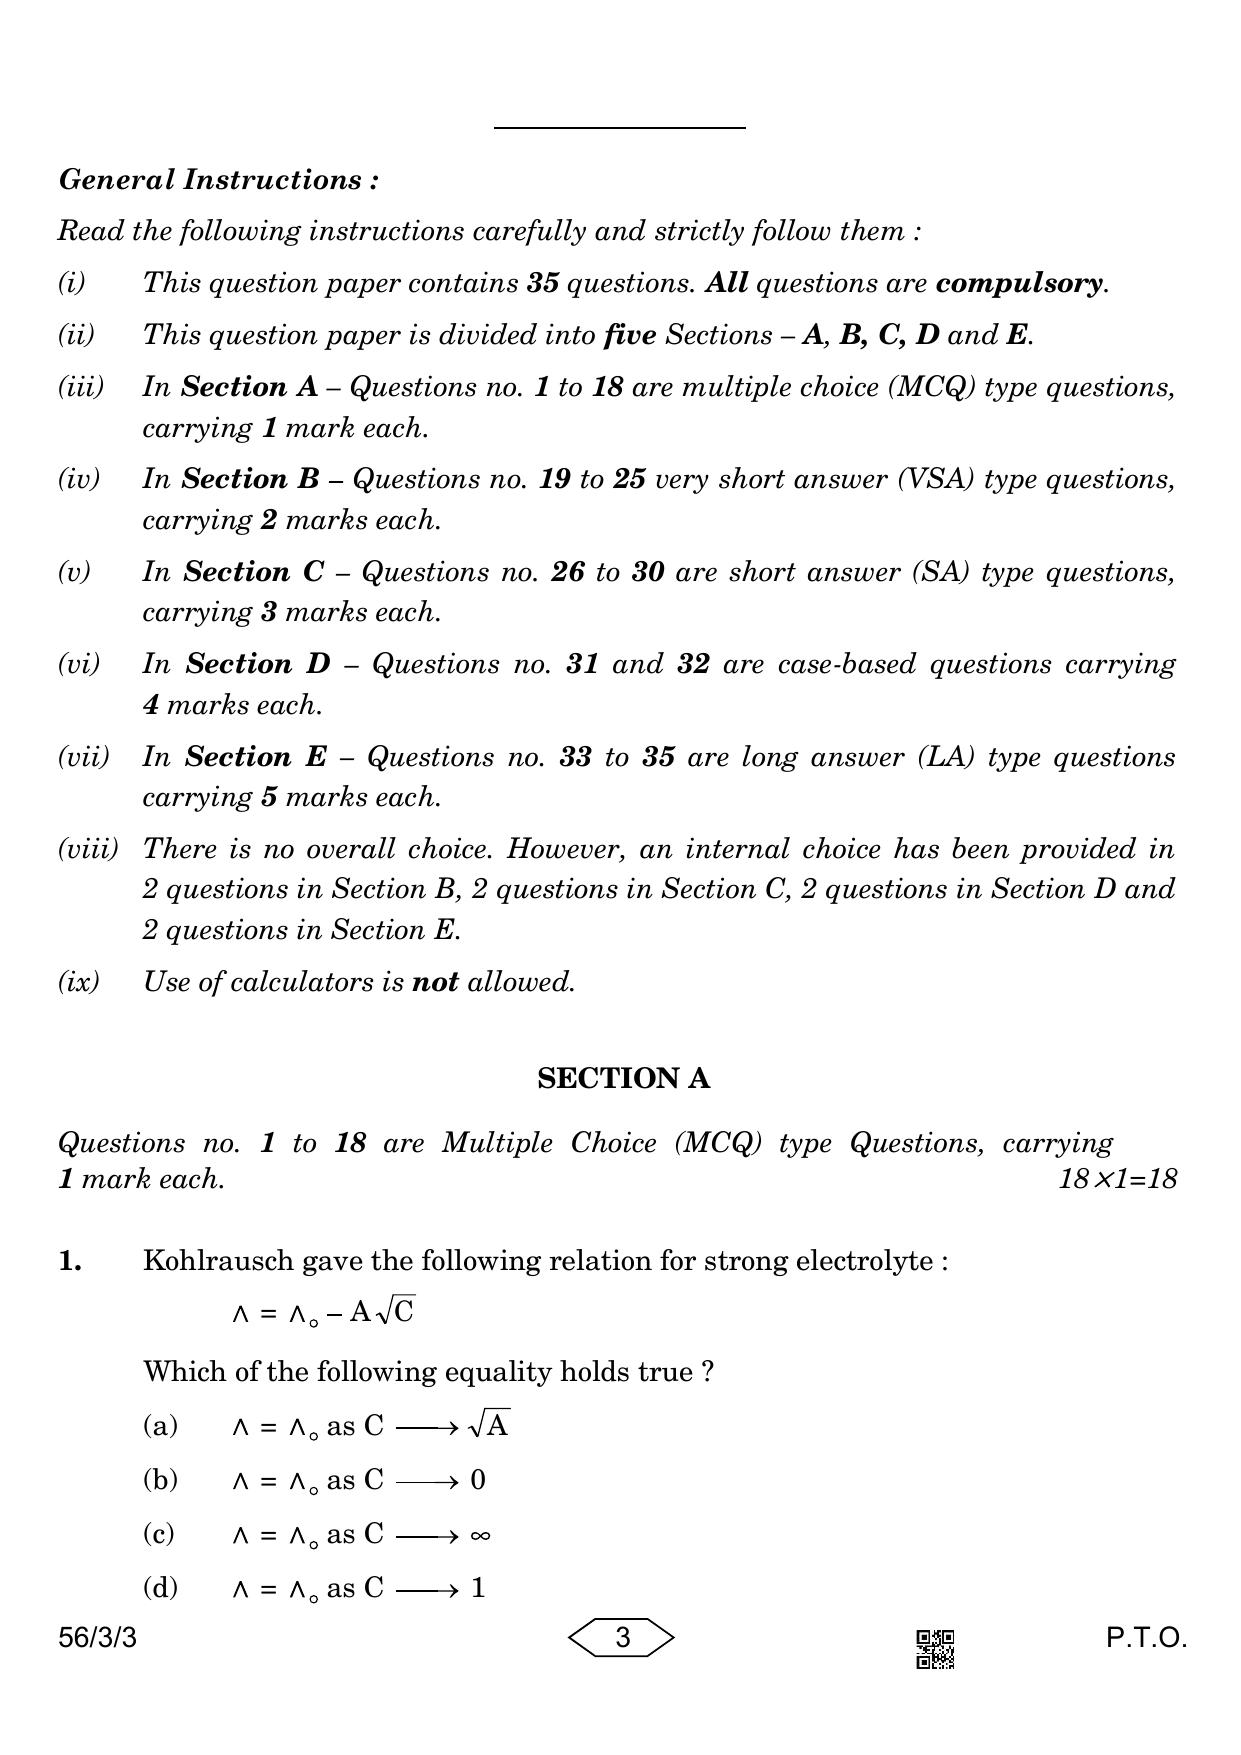 CBSE Class 12 56-3-3 Chemistry 2023 Question Paper - Page 3